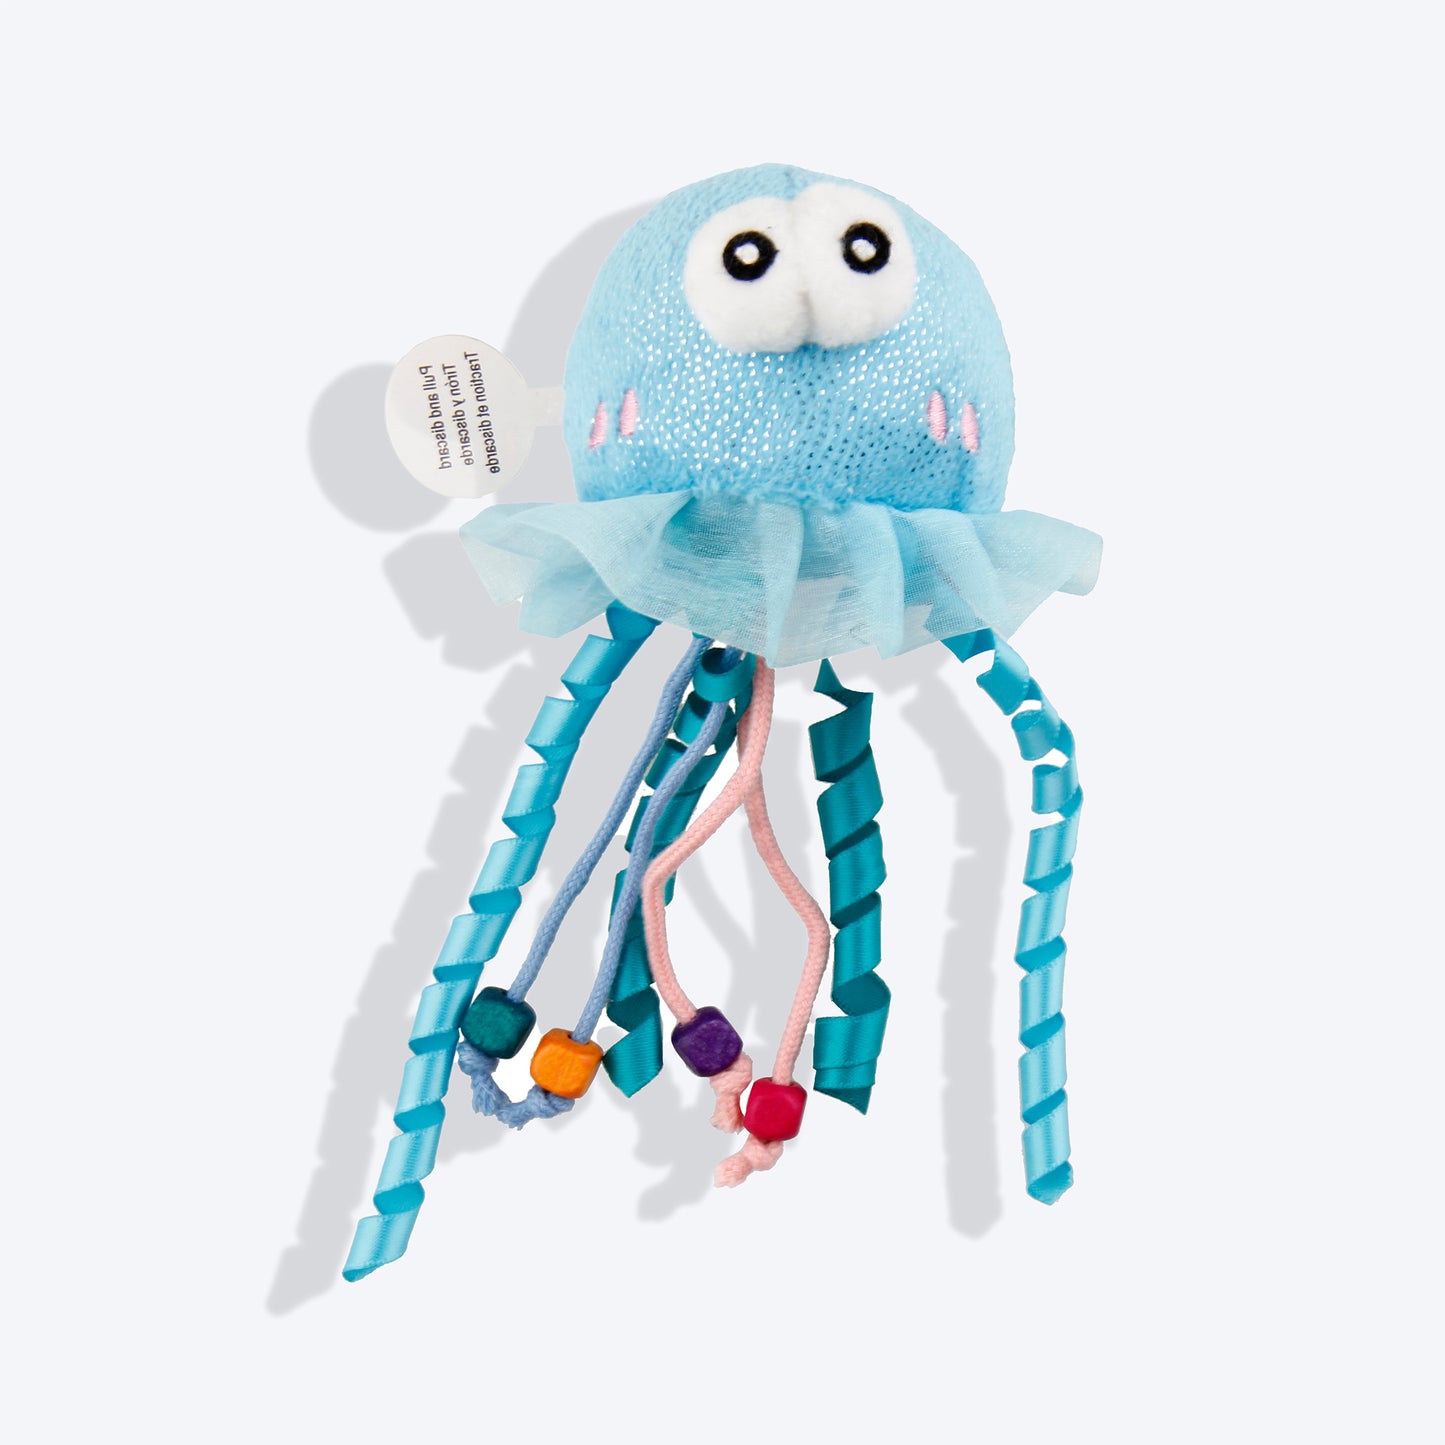 GiGwi Shining Friends Jellyfish With LED Light And Catnip Inside Toy For Cats - Heads Up For Tails